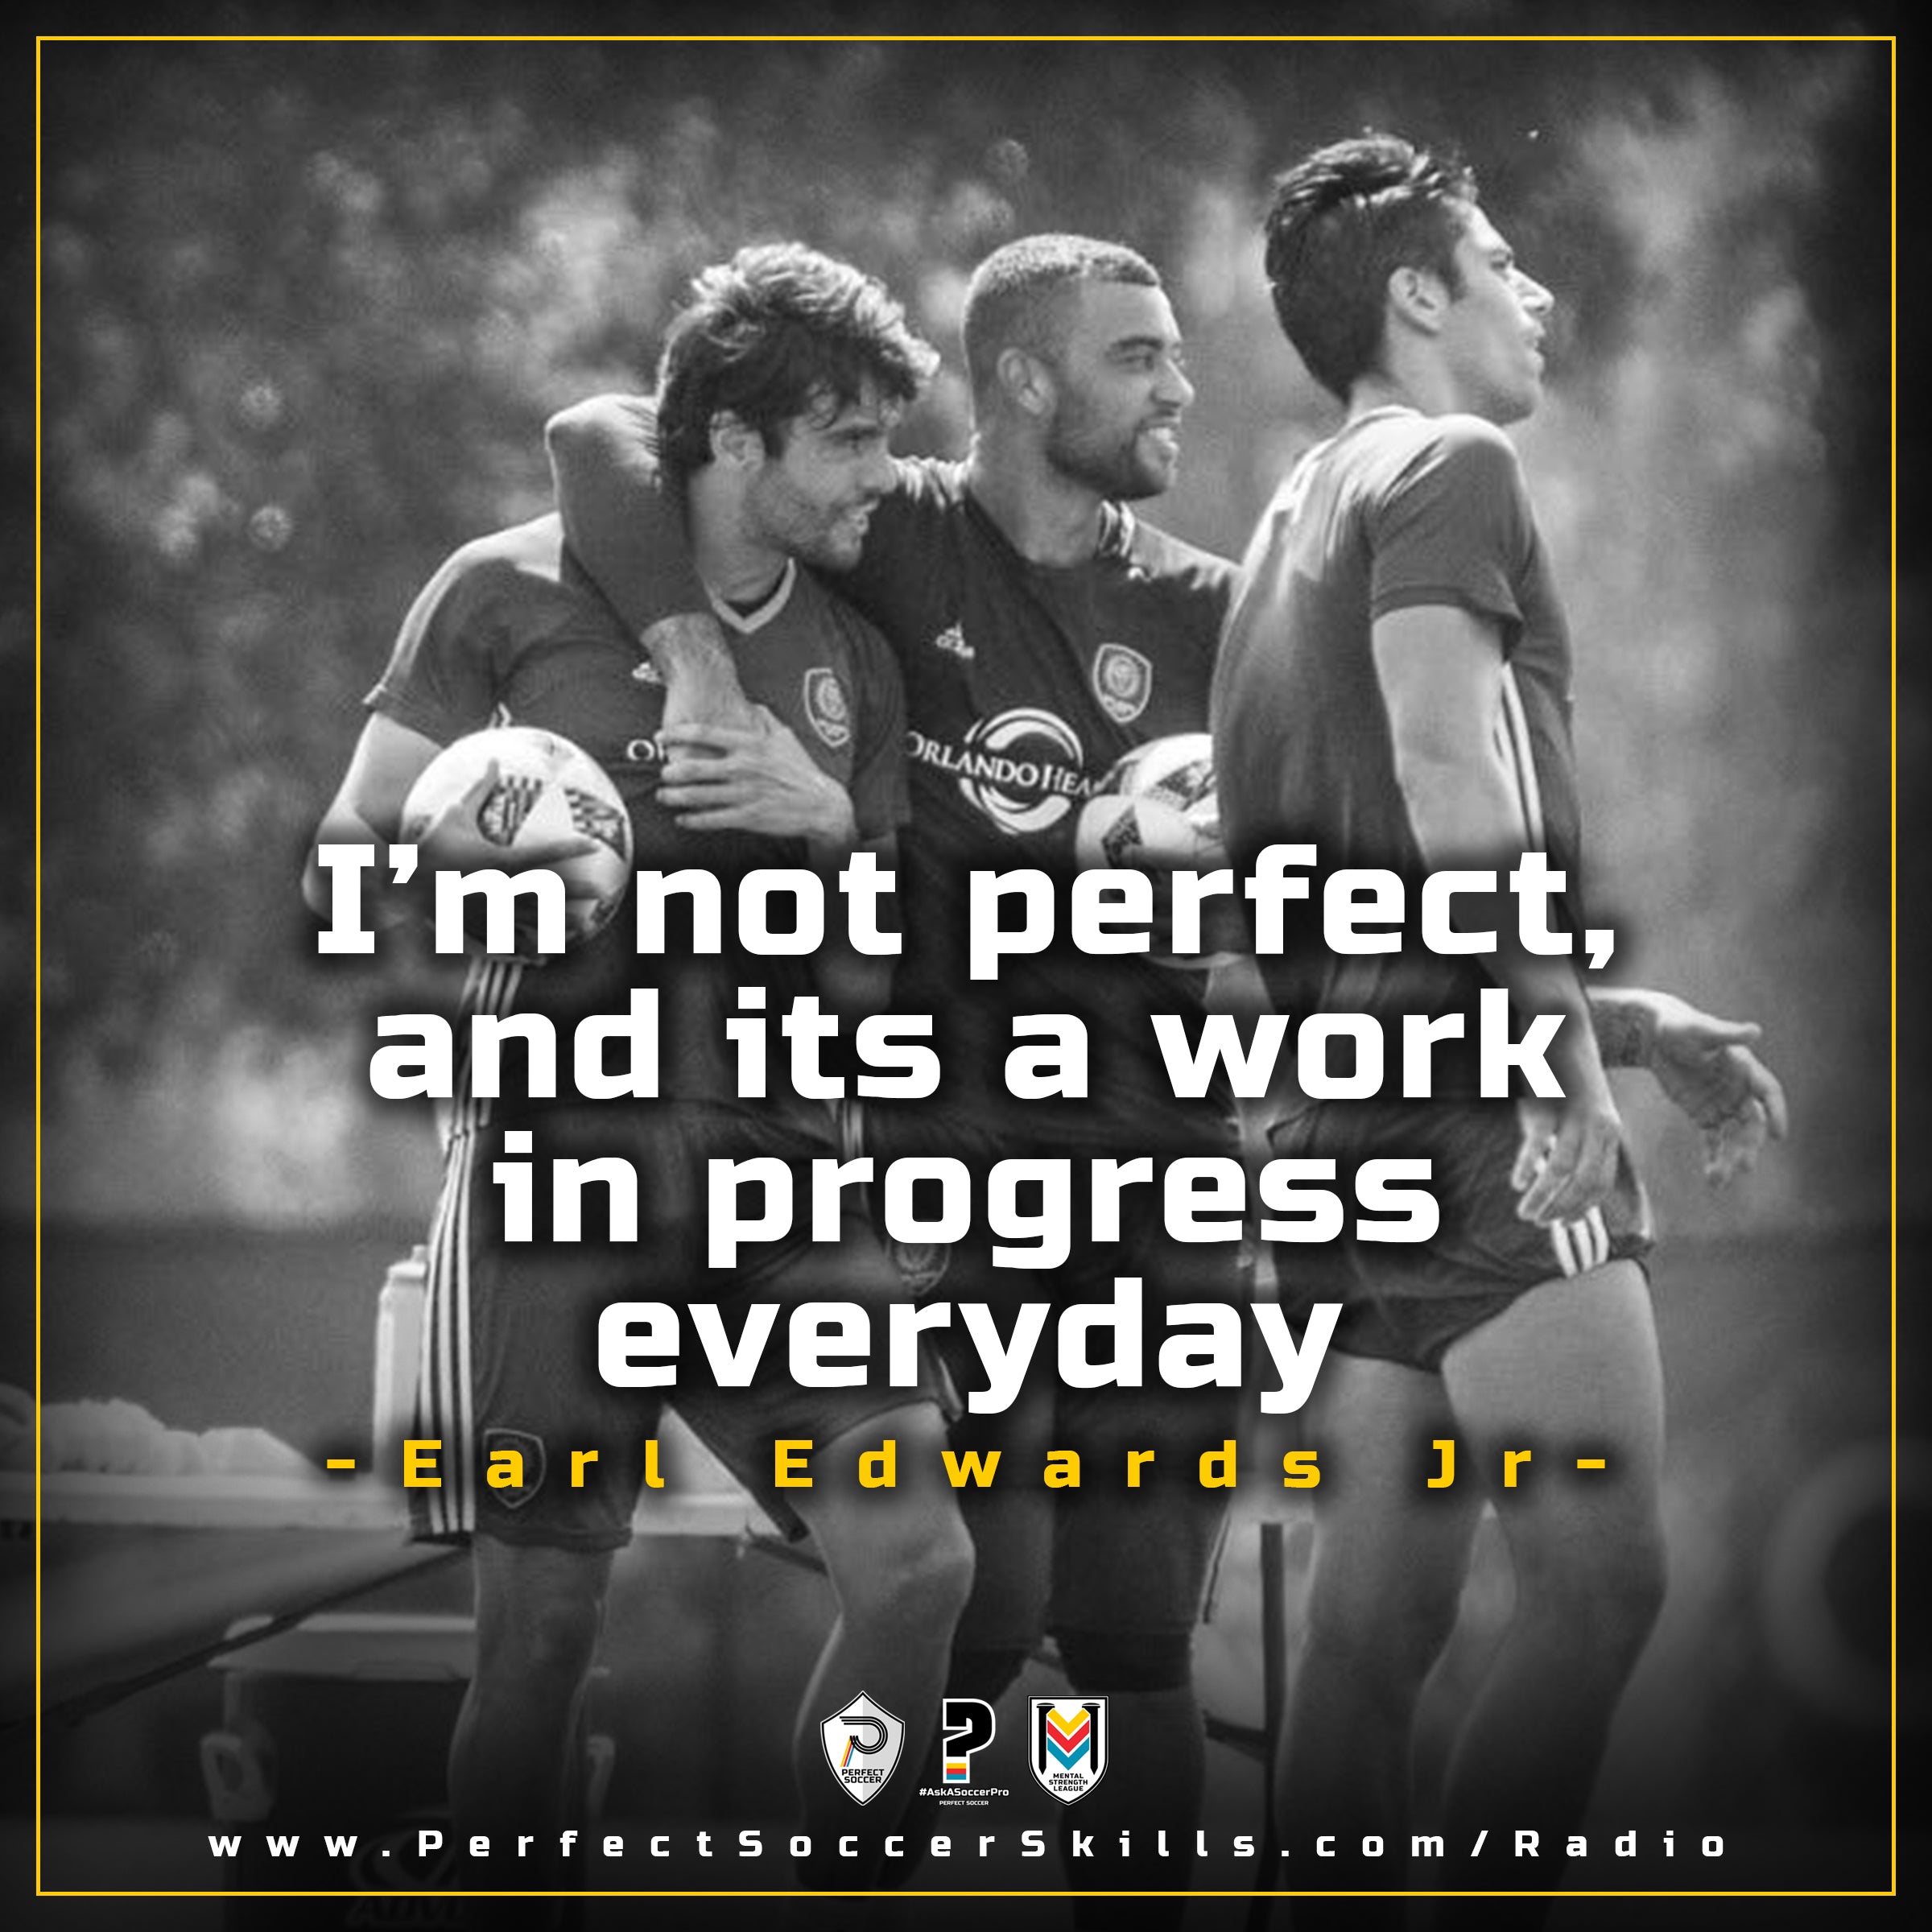 Earl Edwards Jr. "I'm Not Perfect, and its a work in progress everyday" with Kaka